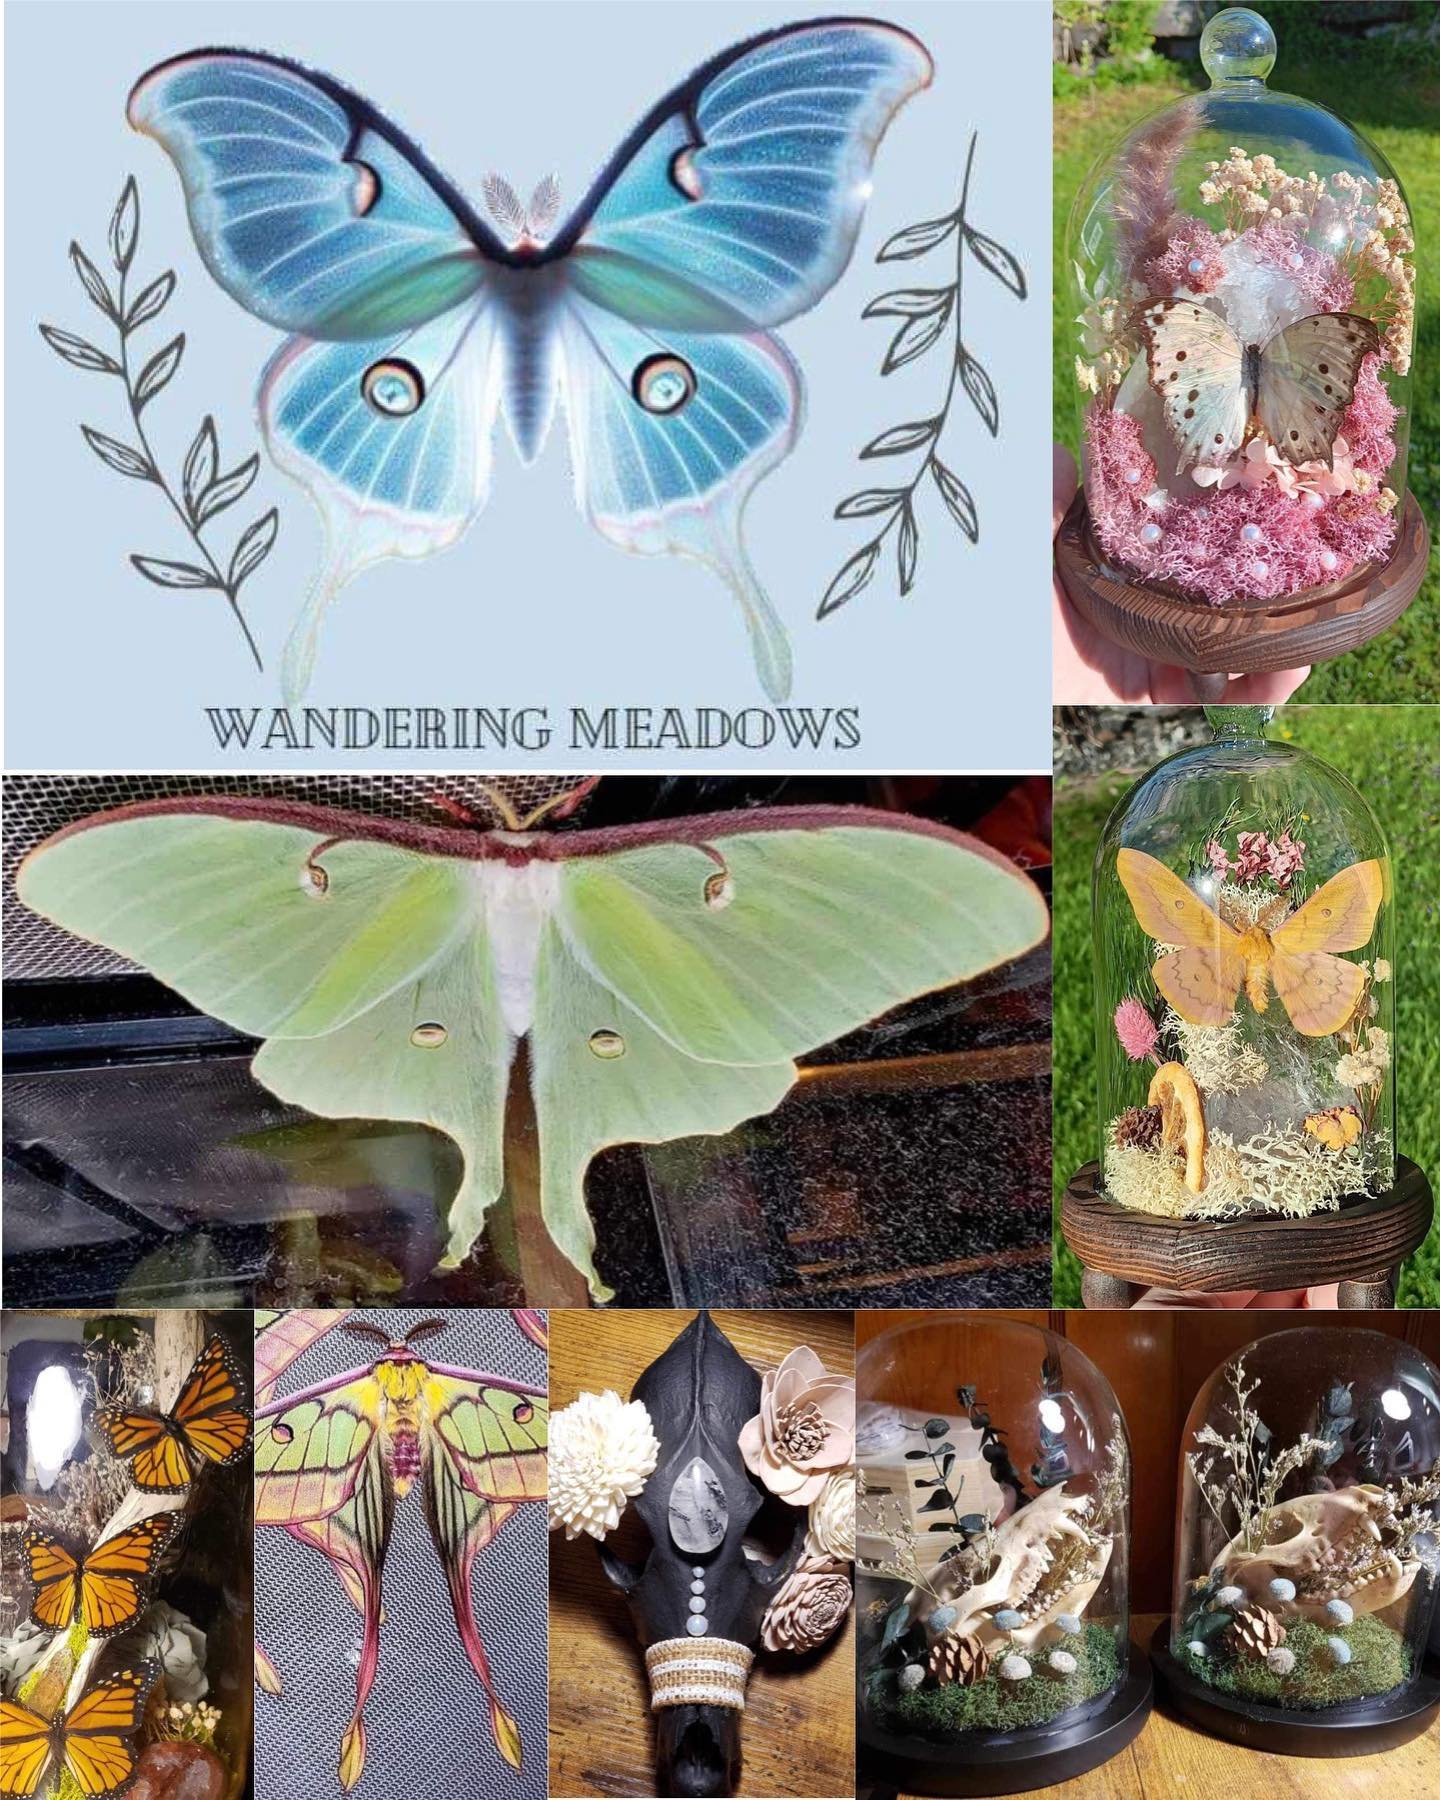 Wandering Meadows Oddities will be joining us June 2nd! 

They will have a variety of handmade pieces to offer that contain beautifully preserved specimens, among other oddities, curiosities, and crystals! 

Make sure to check them out! #oddities #cr